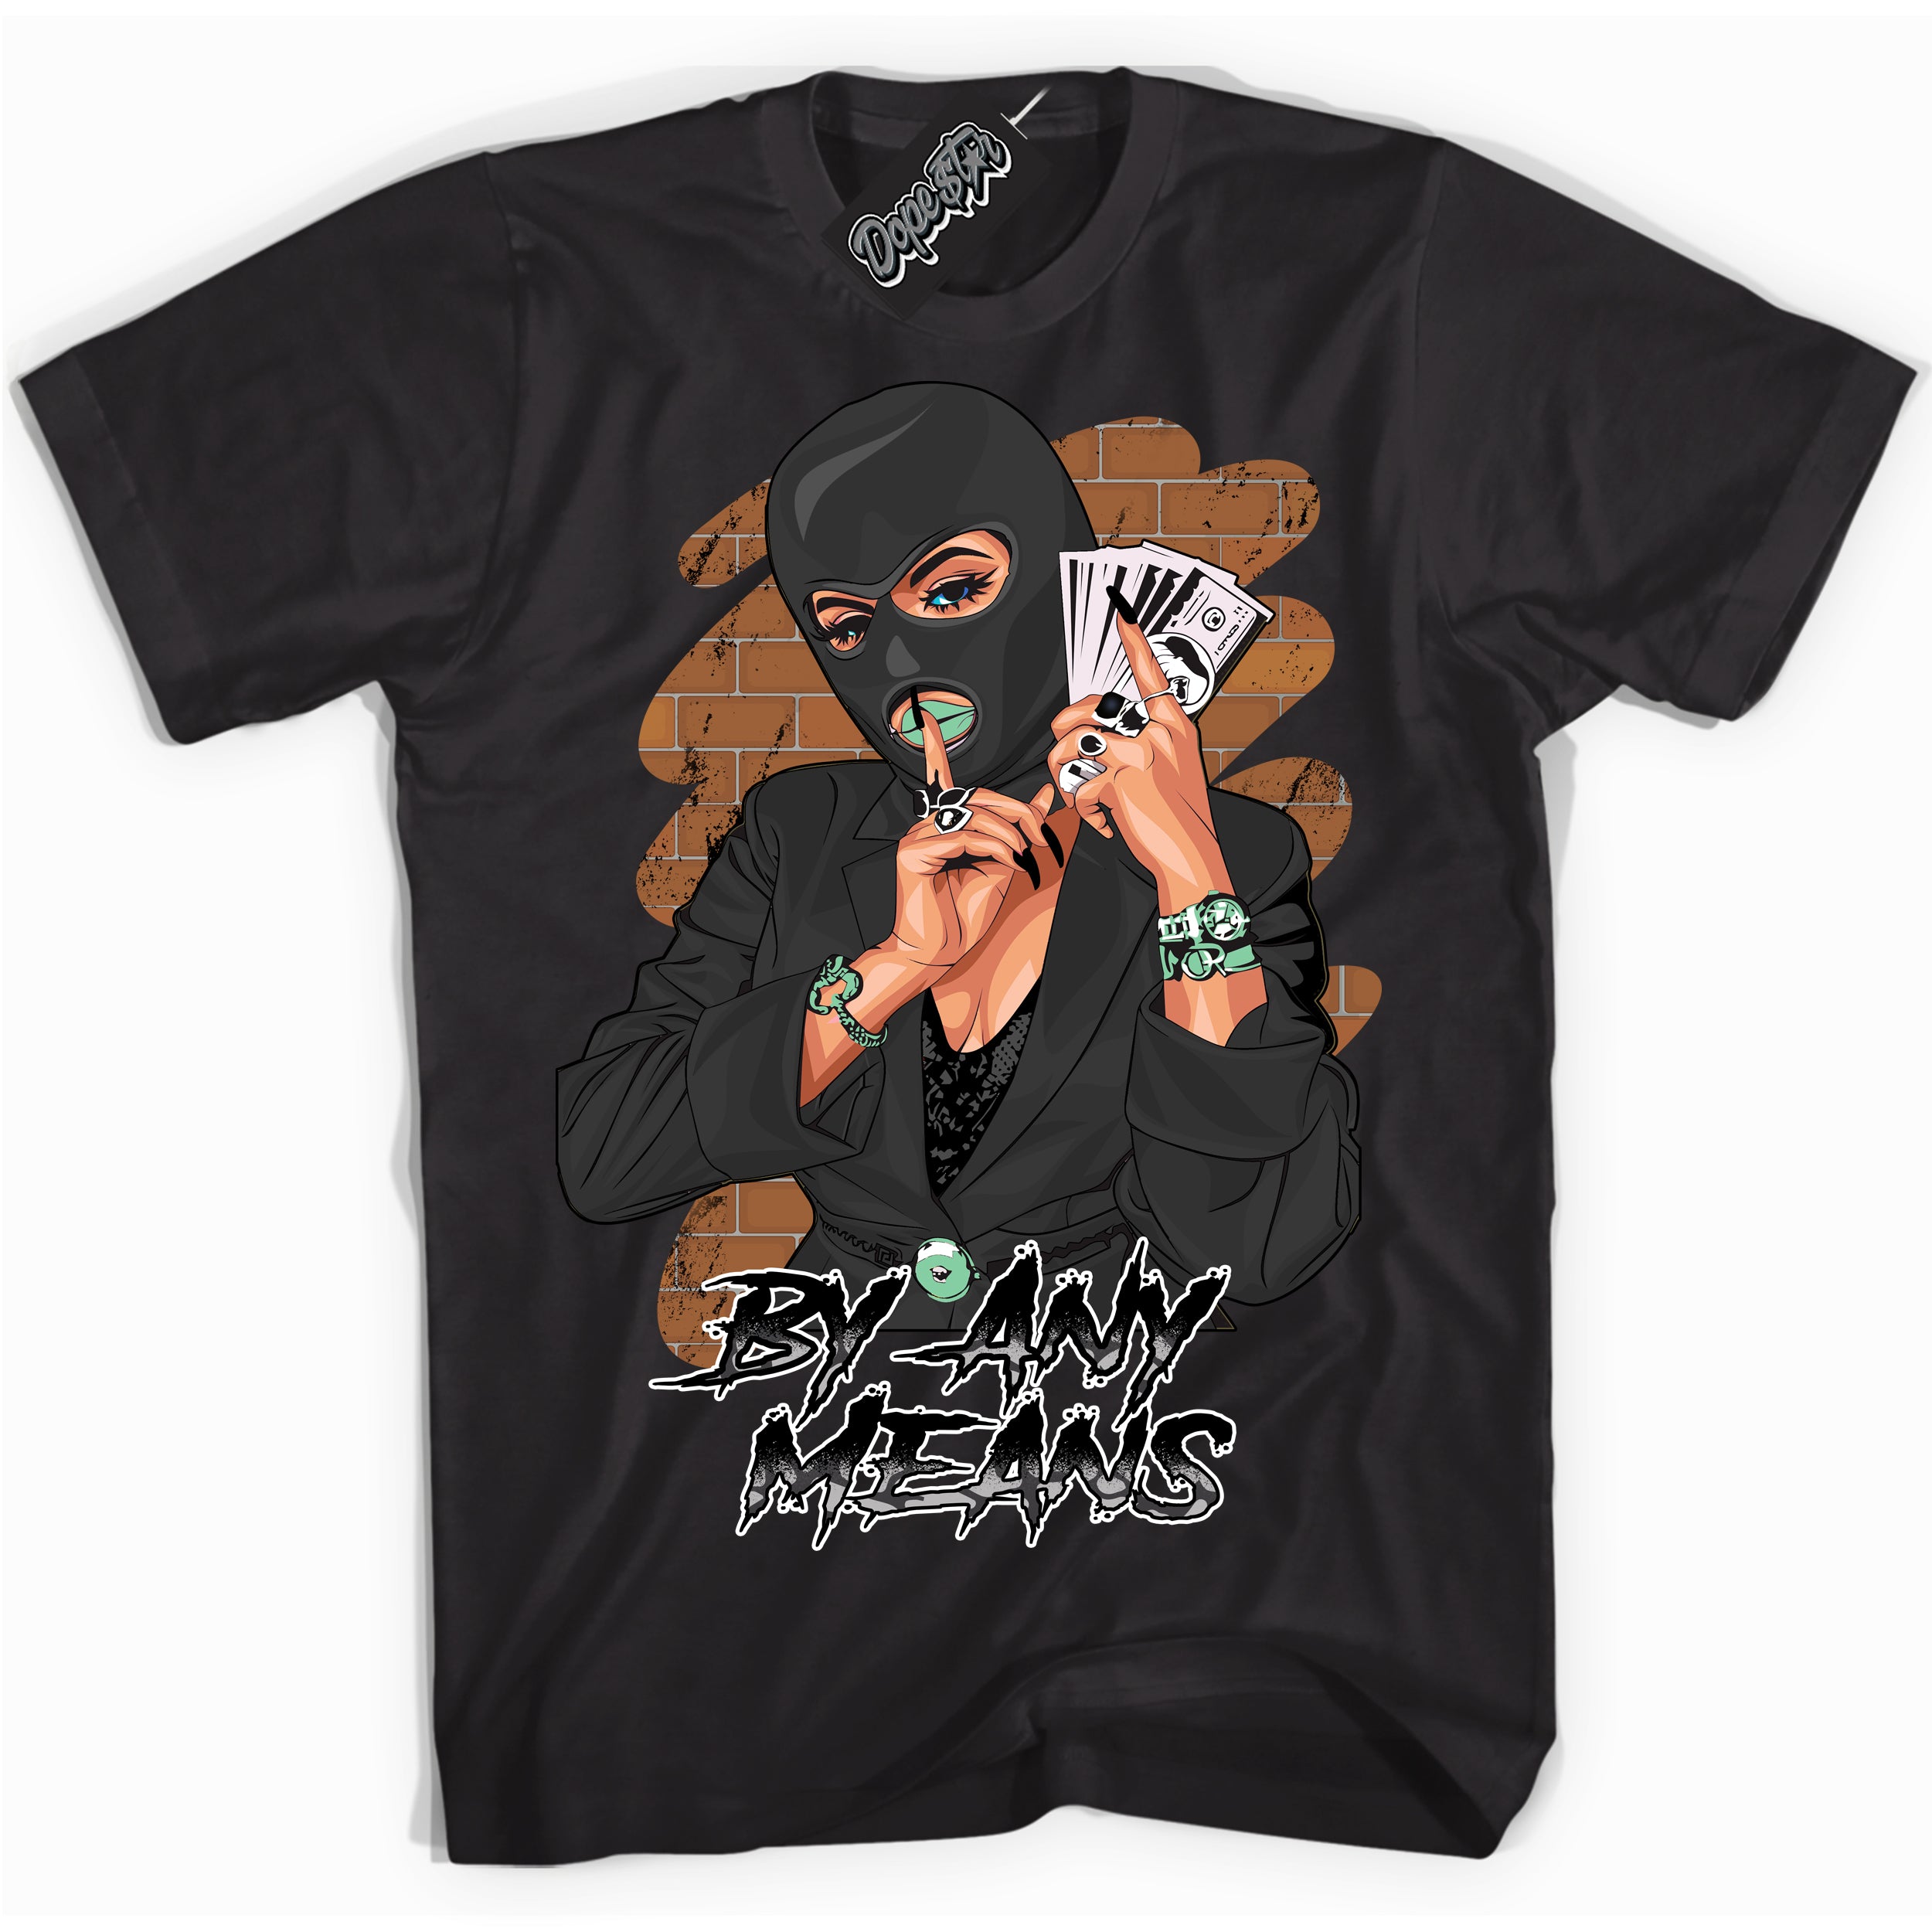 Cool Black graphic tee with “ By Any Means ” design, that perfectly matches Green Glow 3s sneakers 